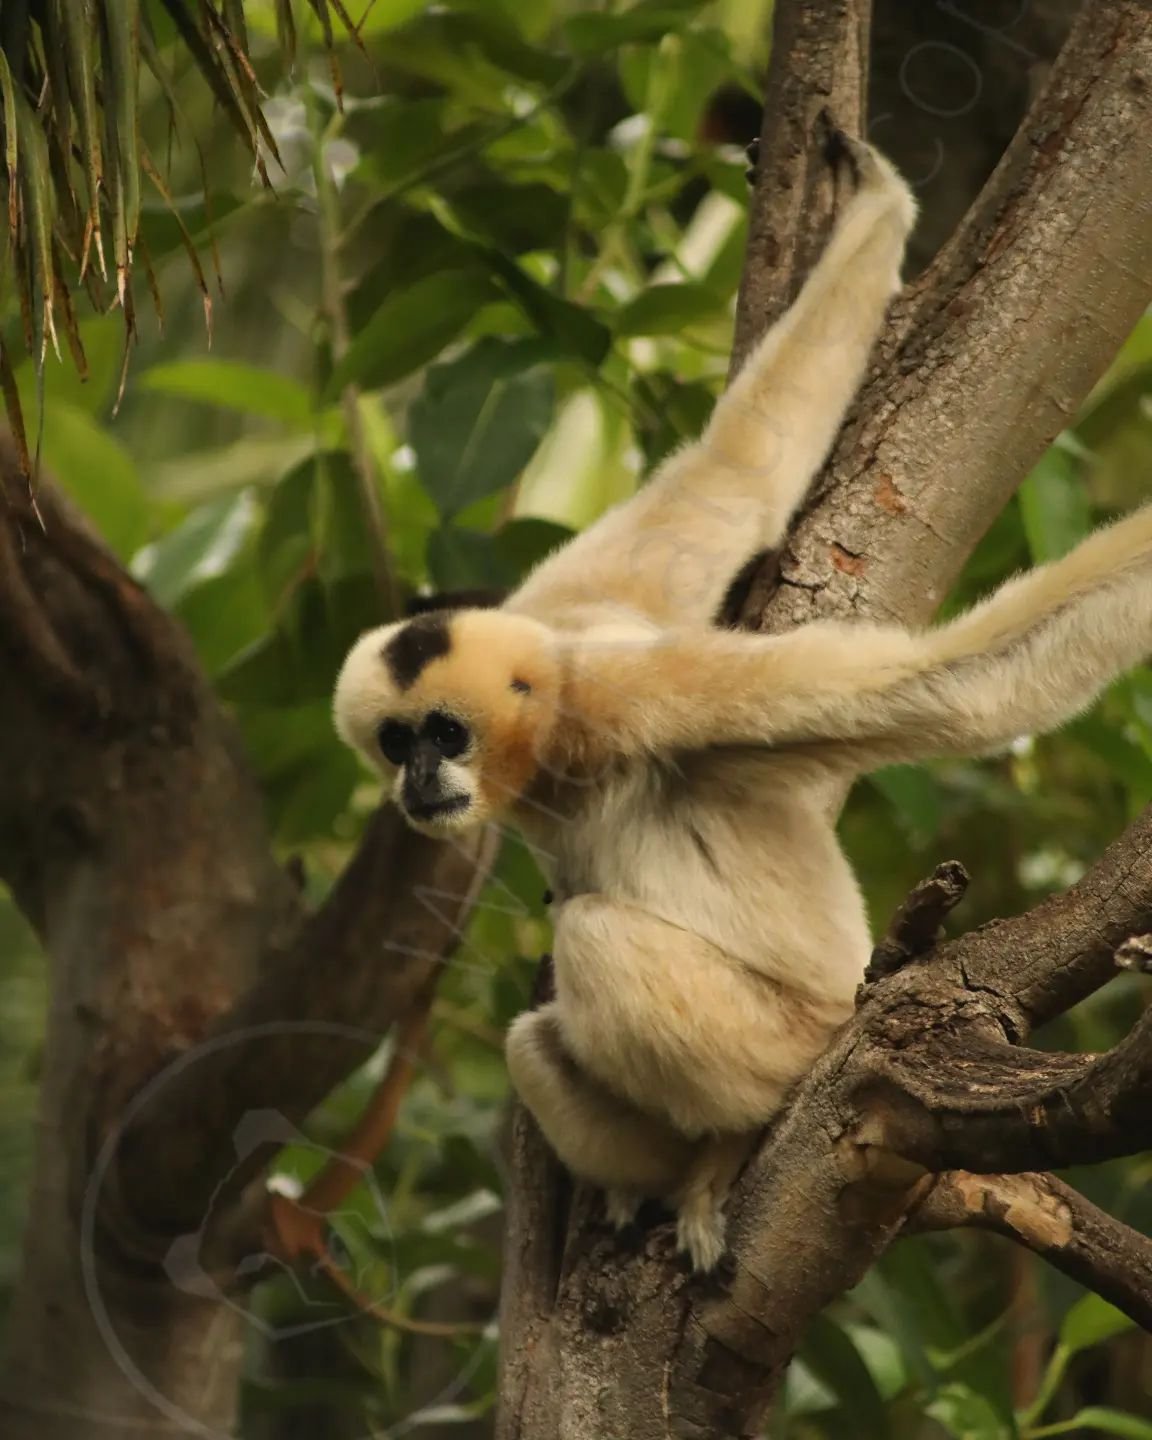 Gibbons are a type of ape that (unlike most great apes) often form long term pair bonds. They can swing between branches at distances of 15 m (50 ft) at speeds as fast as 55 km/h (34 mph), they are the fastest of all tree dwelling, non-flying mammals